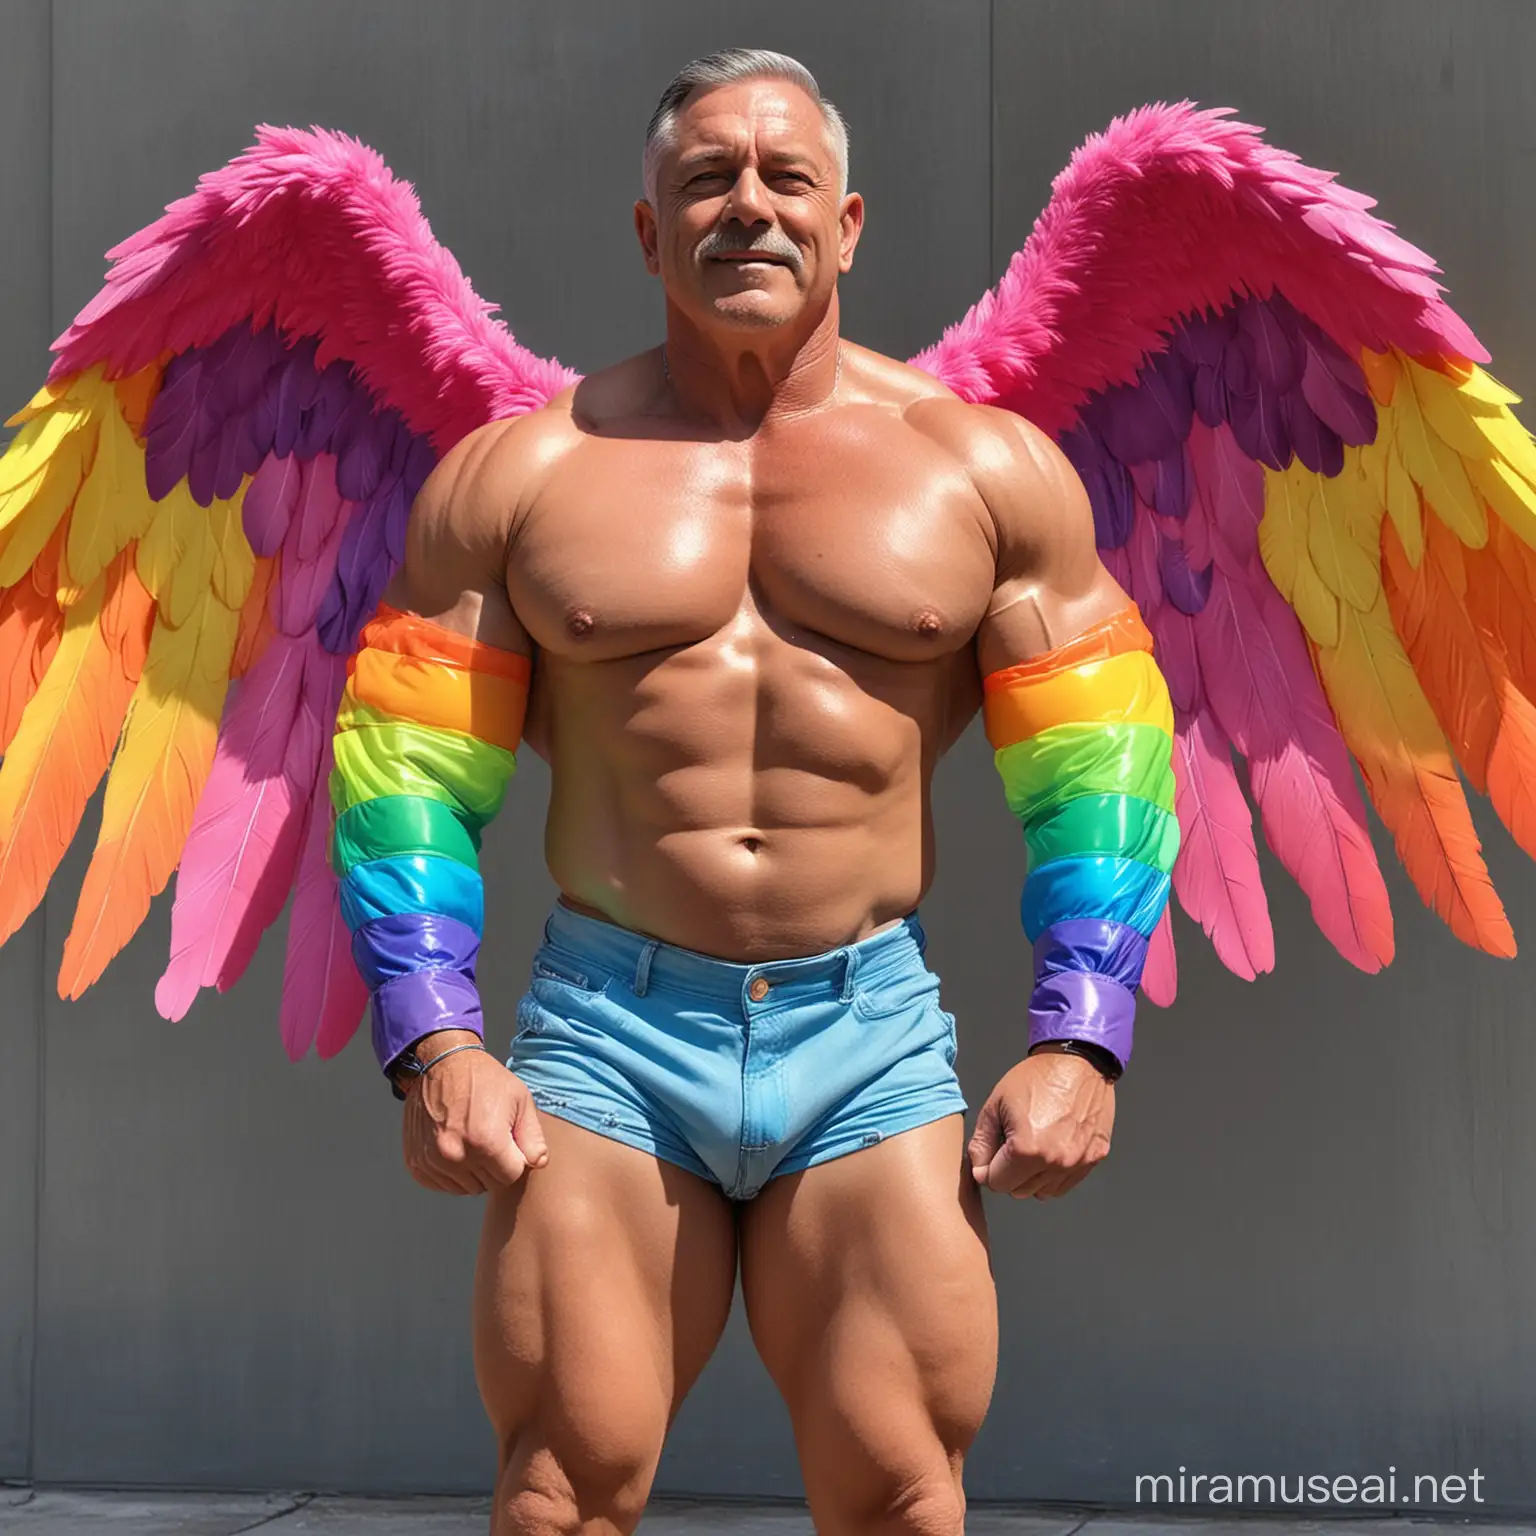 Topless 40s Ultra Chunky Bodybuilder Daddy Wearing Multi-Highlighter Bright Rainbow Colored See Through Eagle Wings Shoulder Jacket short shorts and Flexing Big Strong Arm with Doraemon